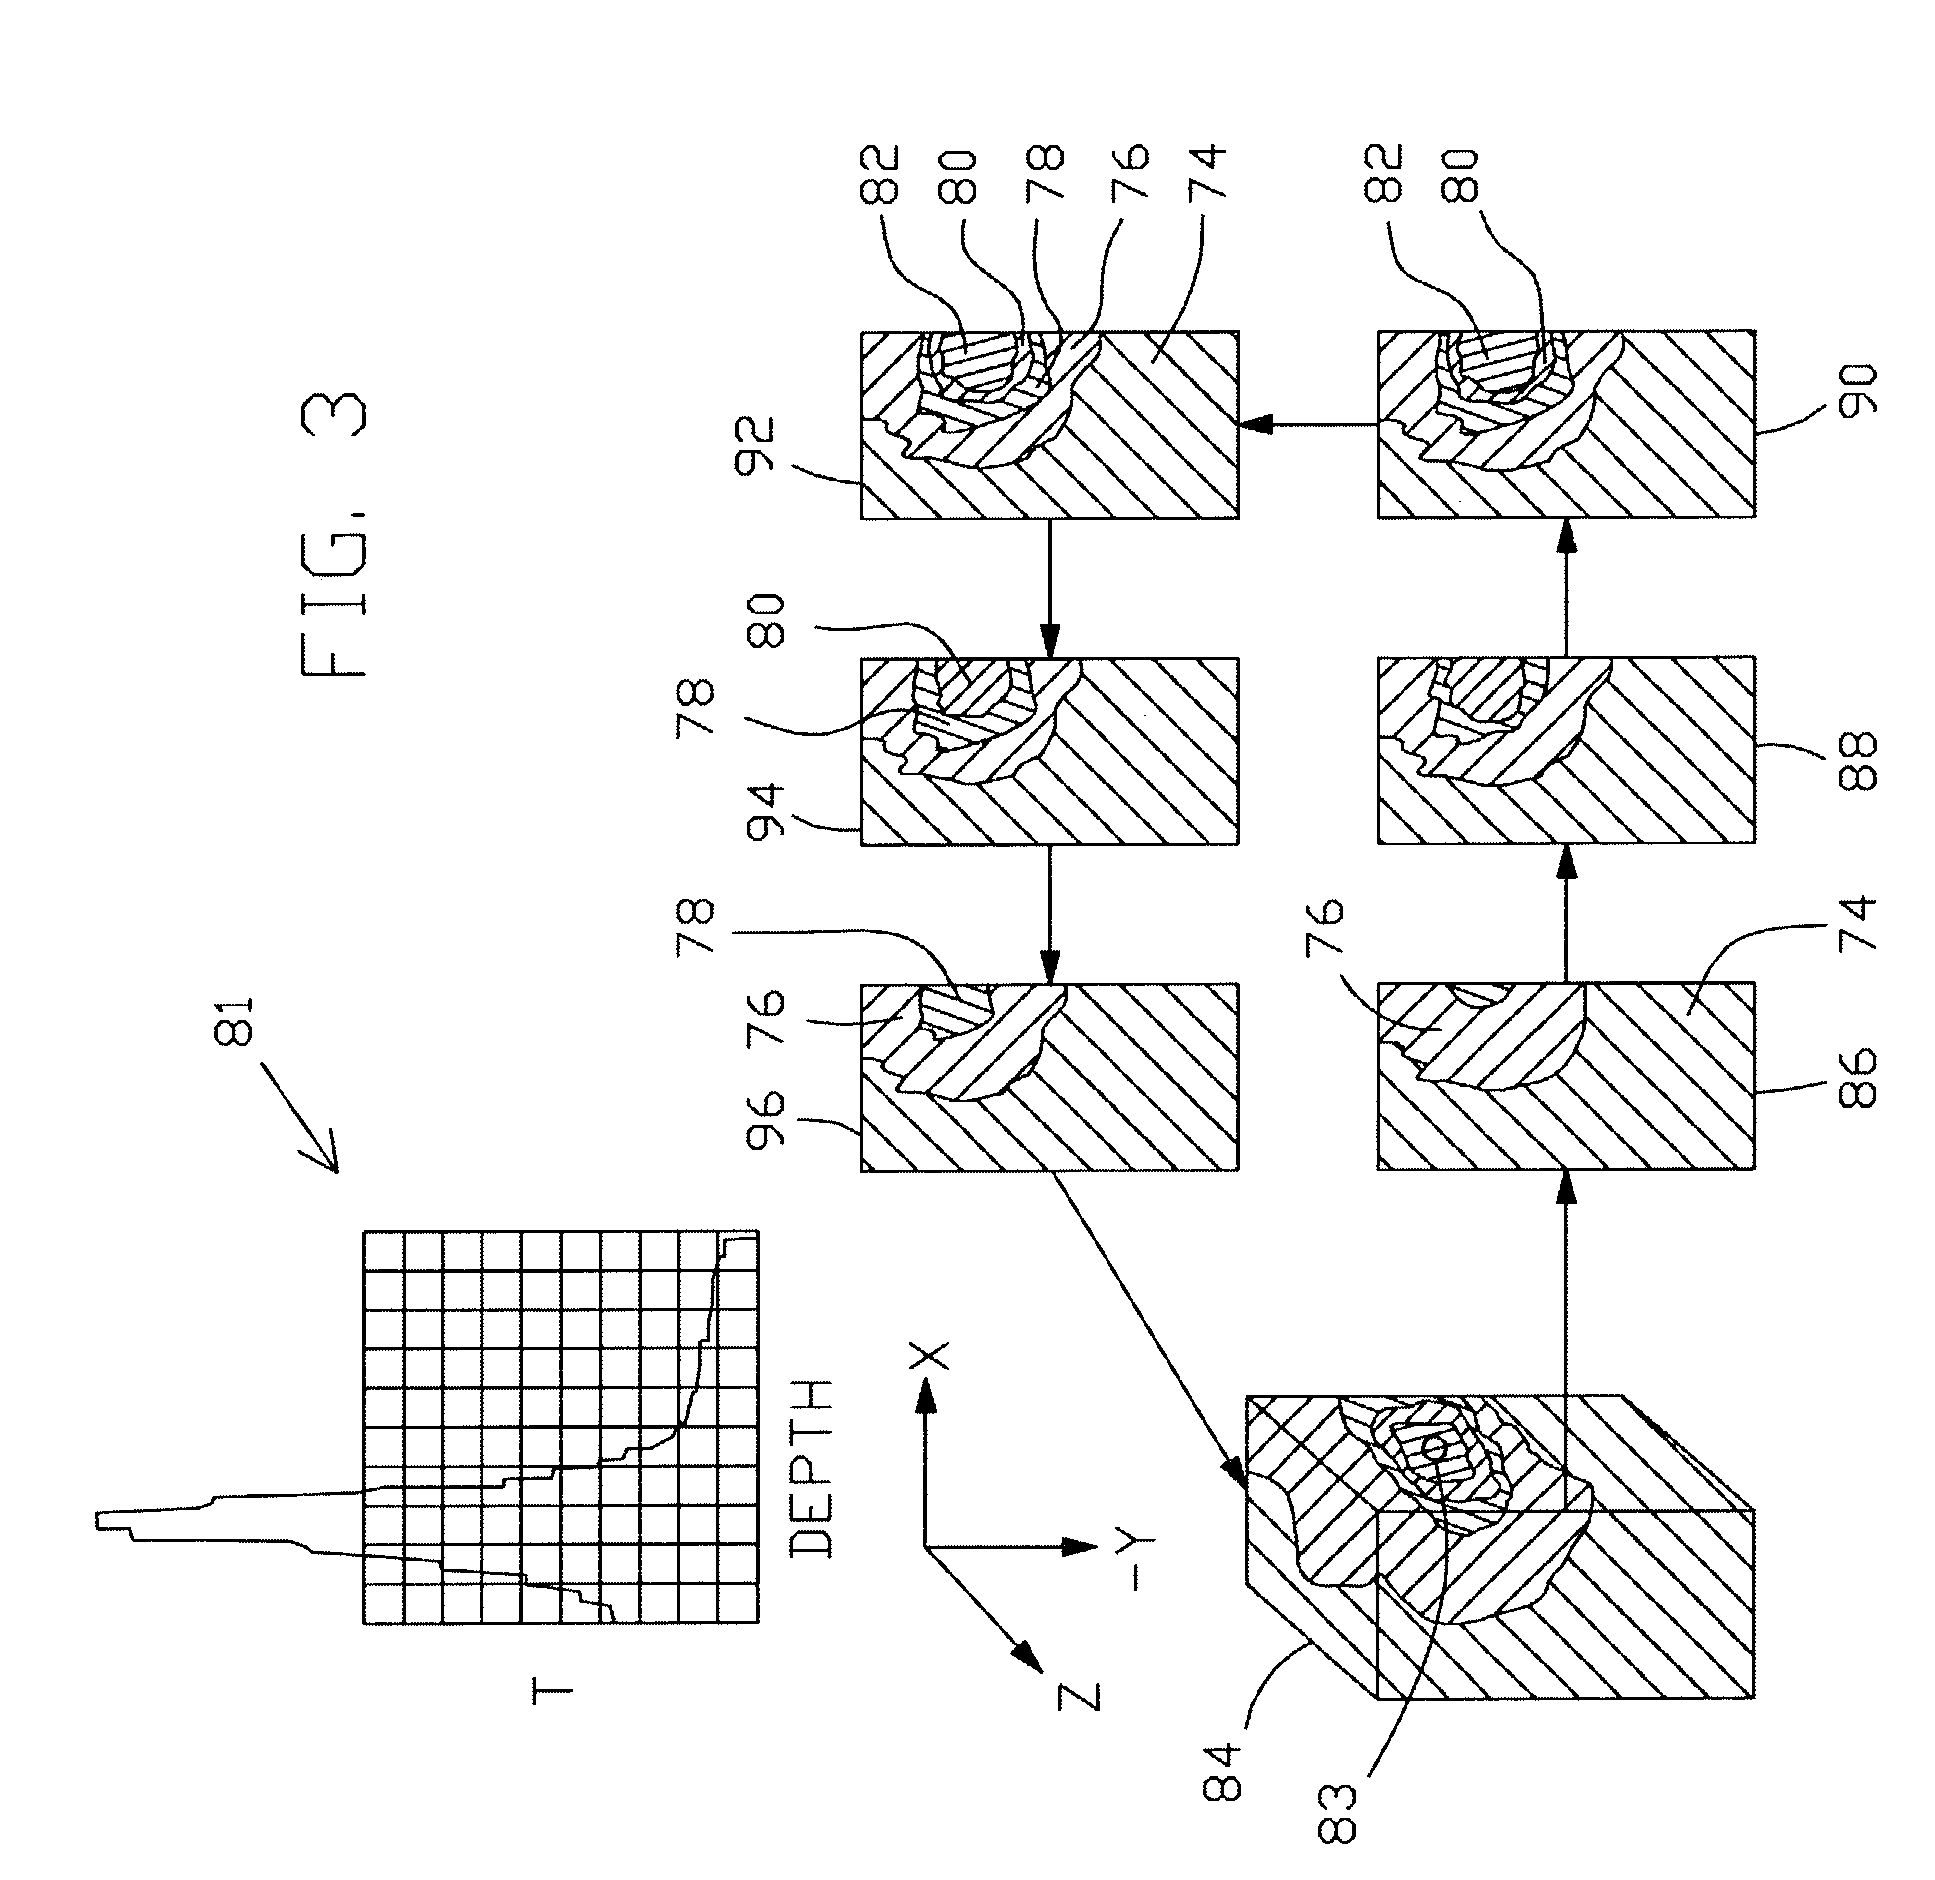 Microwave medical treatment apparatus and method